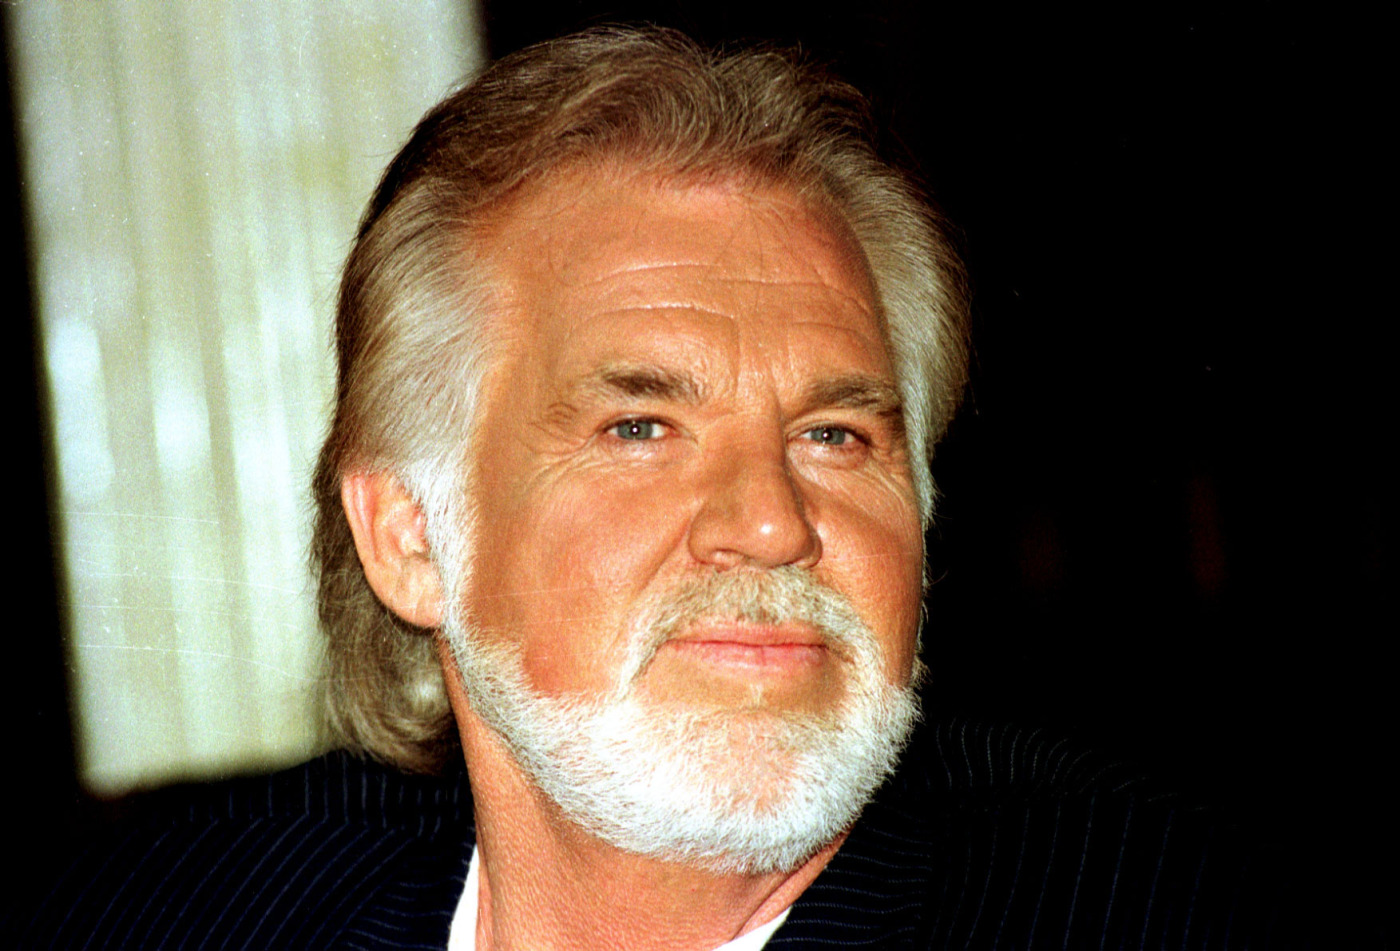 Kenny Rogers passes away